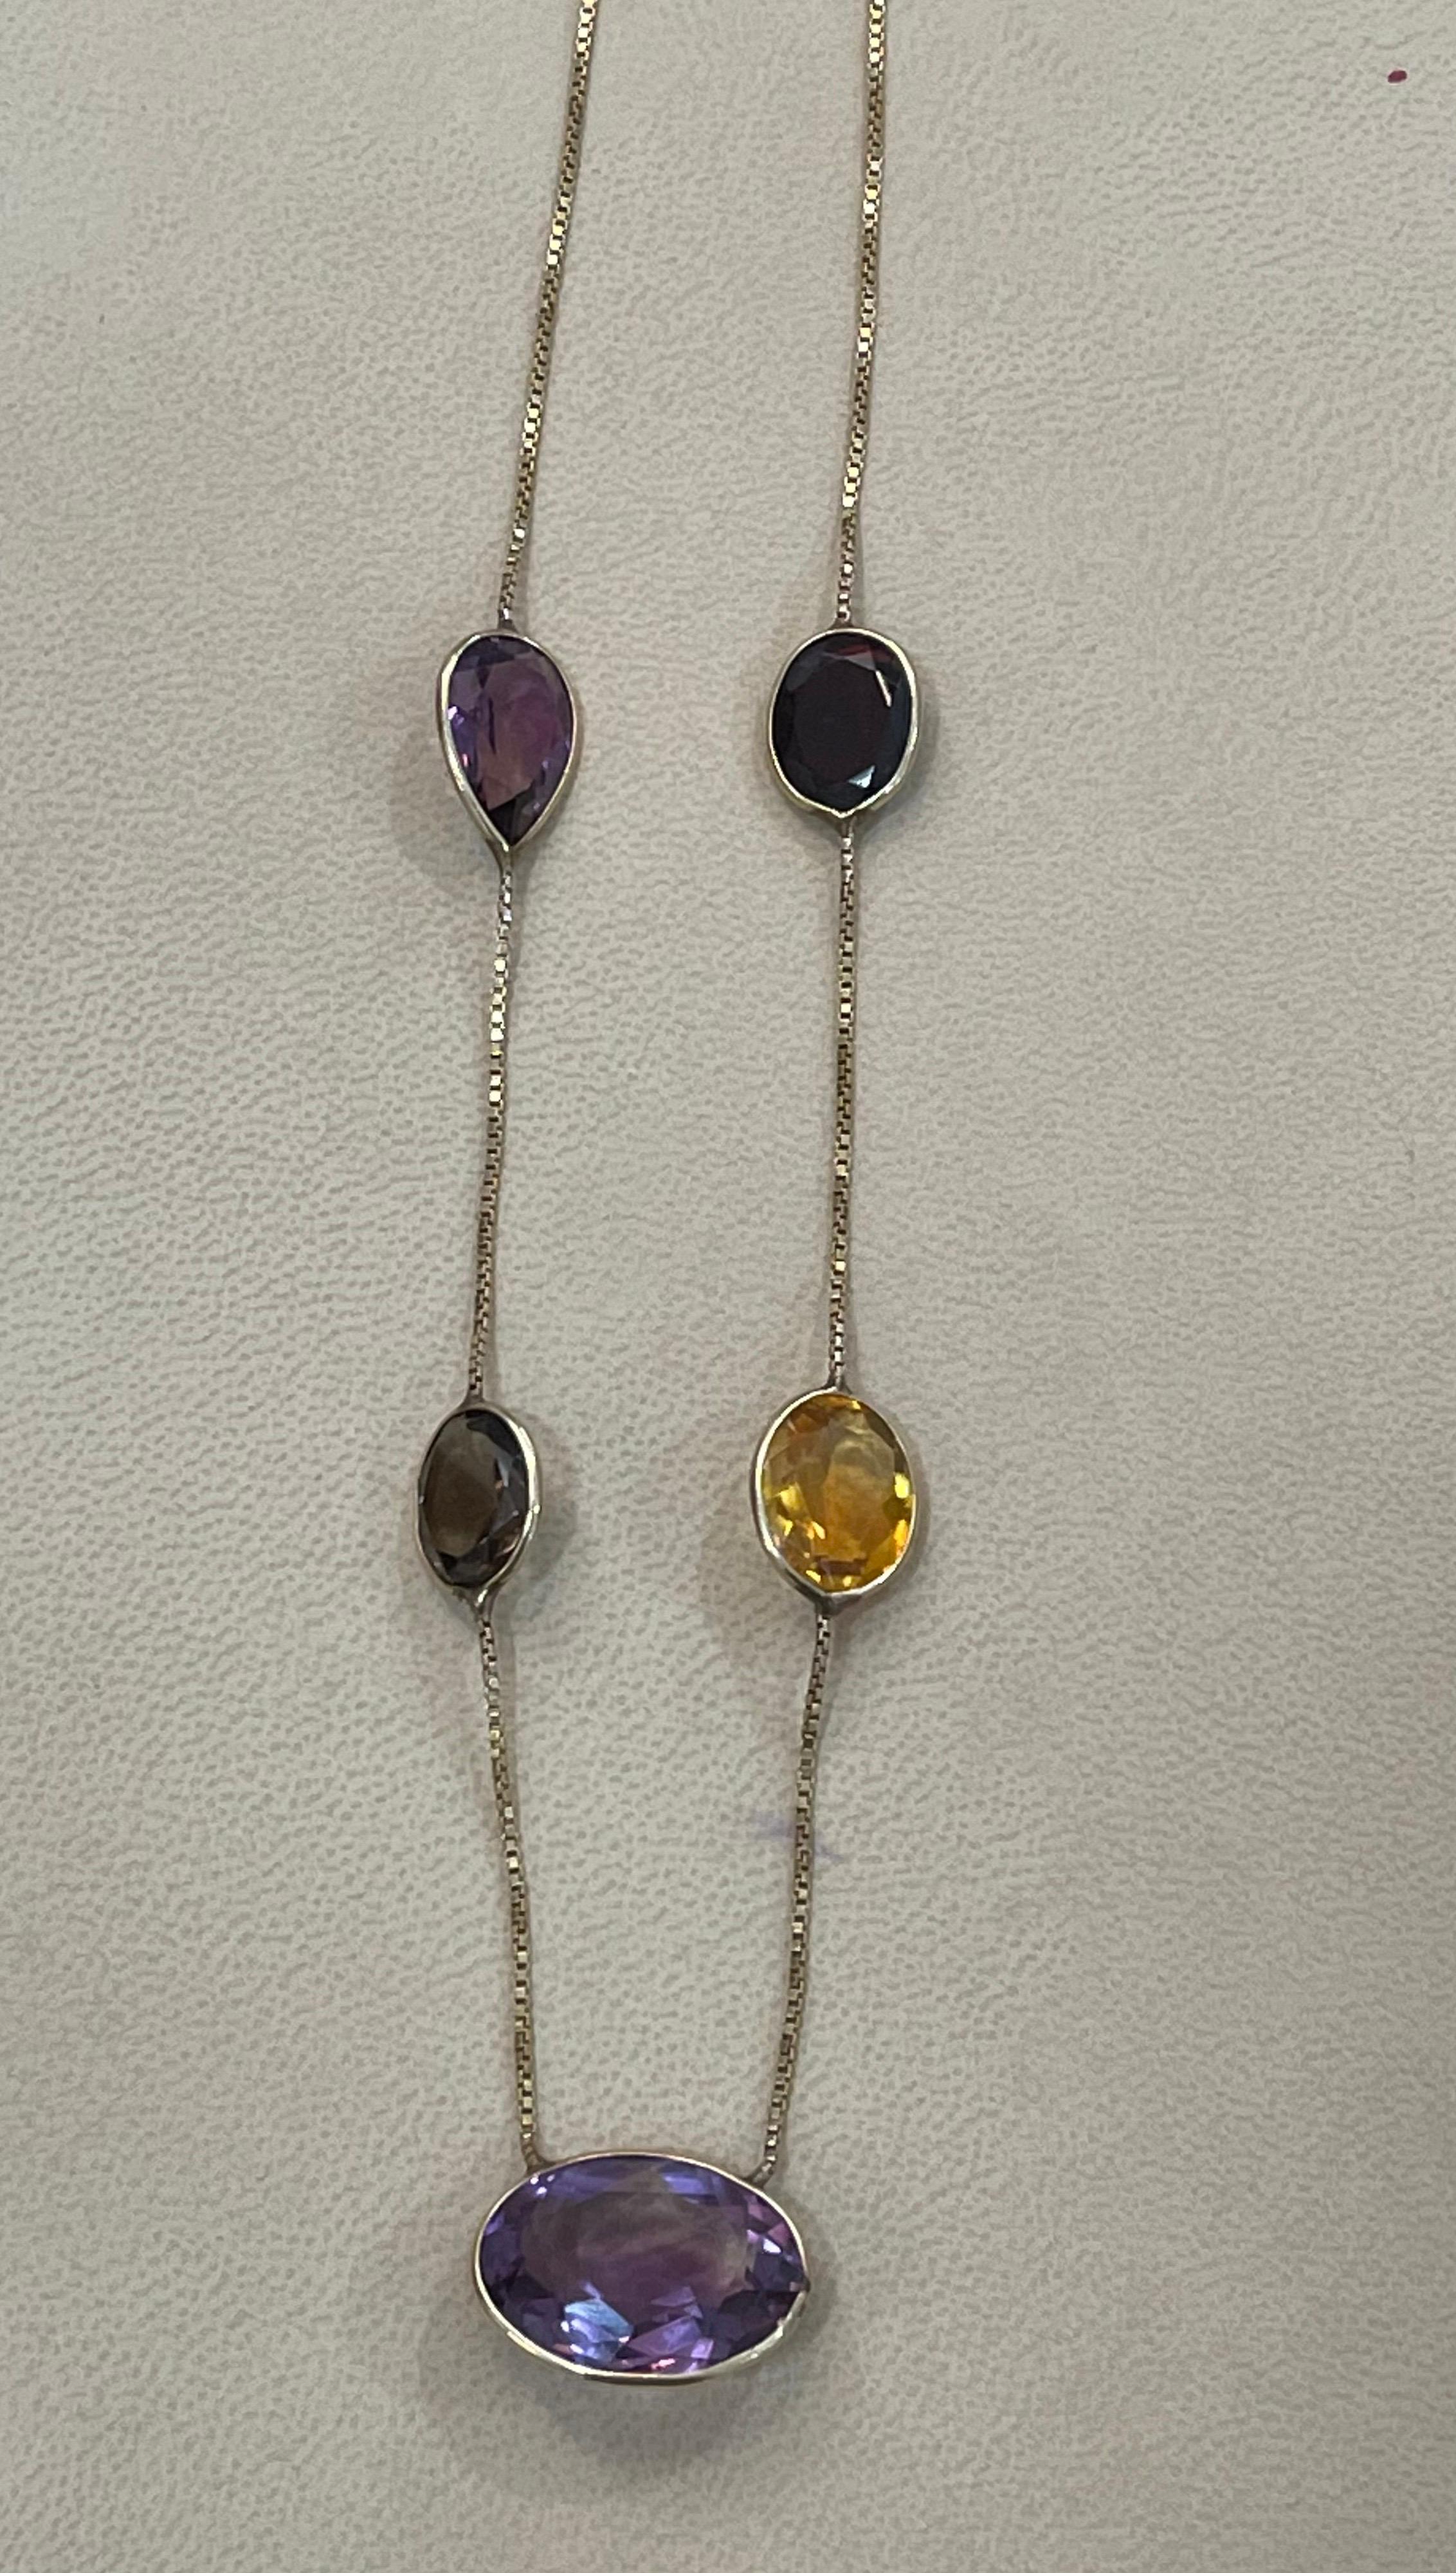 20 Carat Amethyst ,Citrine & Smoky Quartz 5 Piece  Chain Necklace 14 Karat Gold 17 Inch
14 K White Gold 
This Simple Necklace is consist  of  Fine   Semi Precious stones ,5 pieces.
 Natural  Amethyst , Smoky Quartz and citrine 
In the Center there